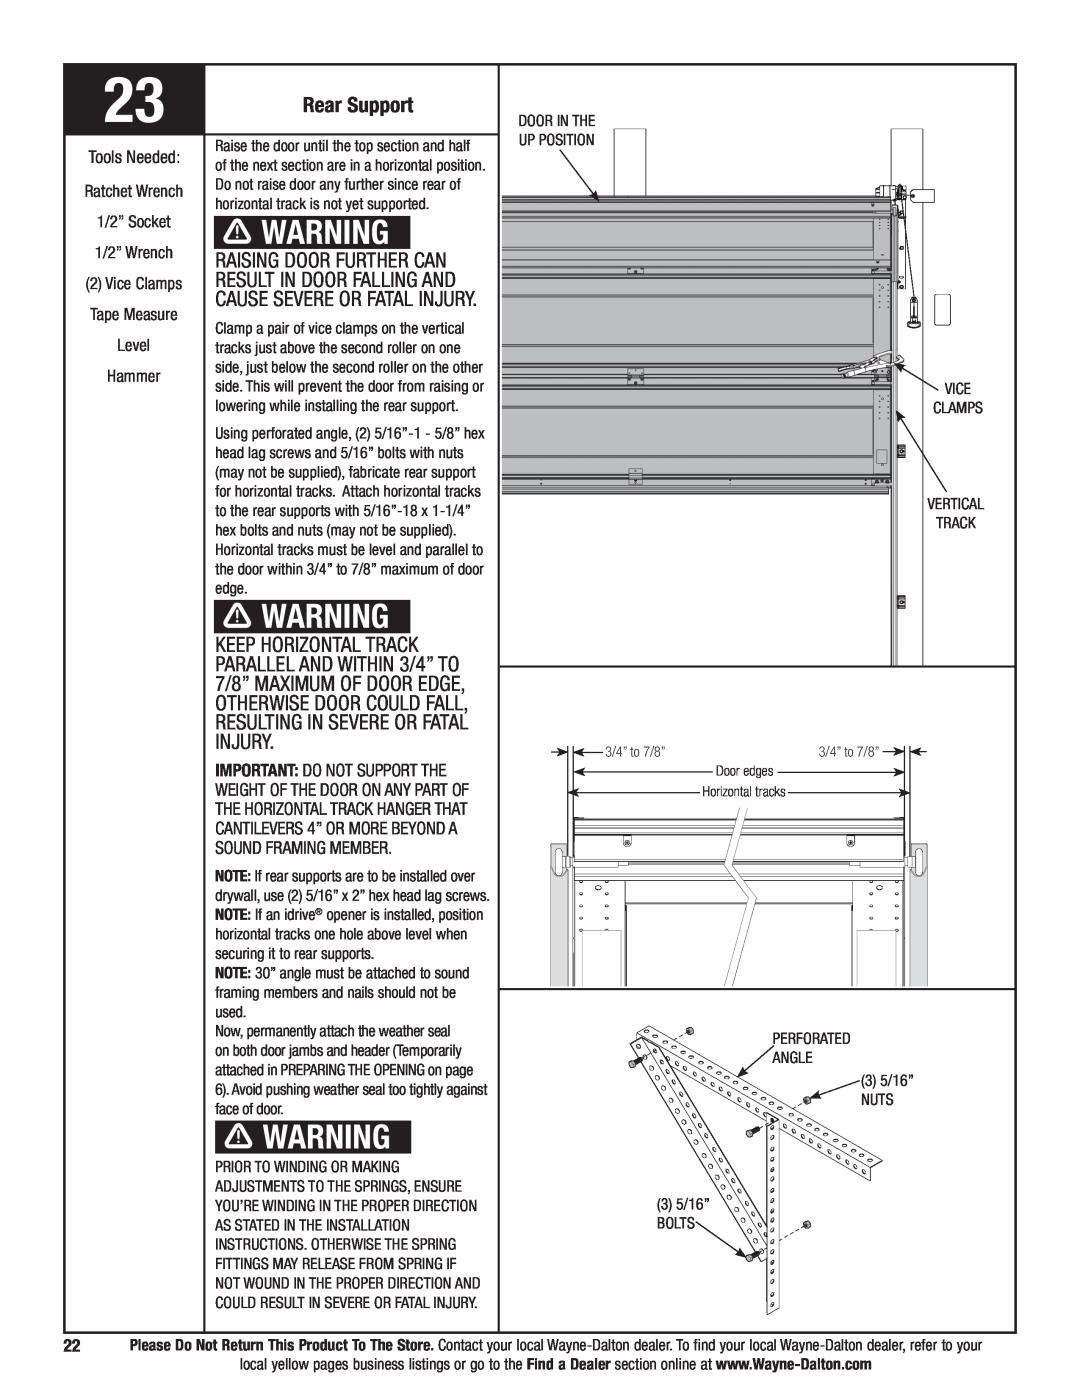 Wayne-Dalton 9700 Rear Support, Raising door further can, result in door falling and, cause severe or fatal injury 